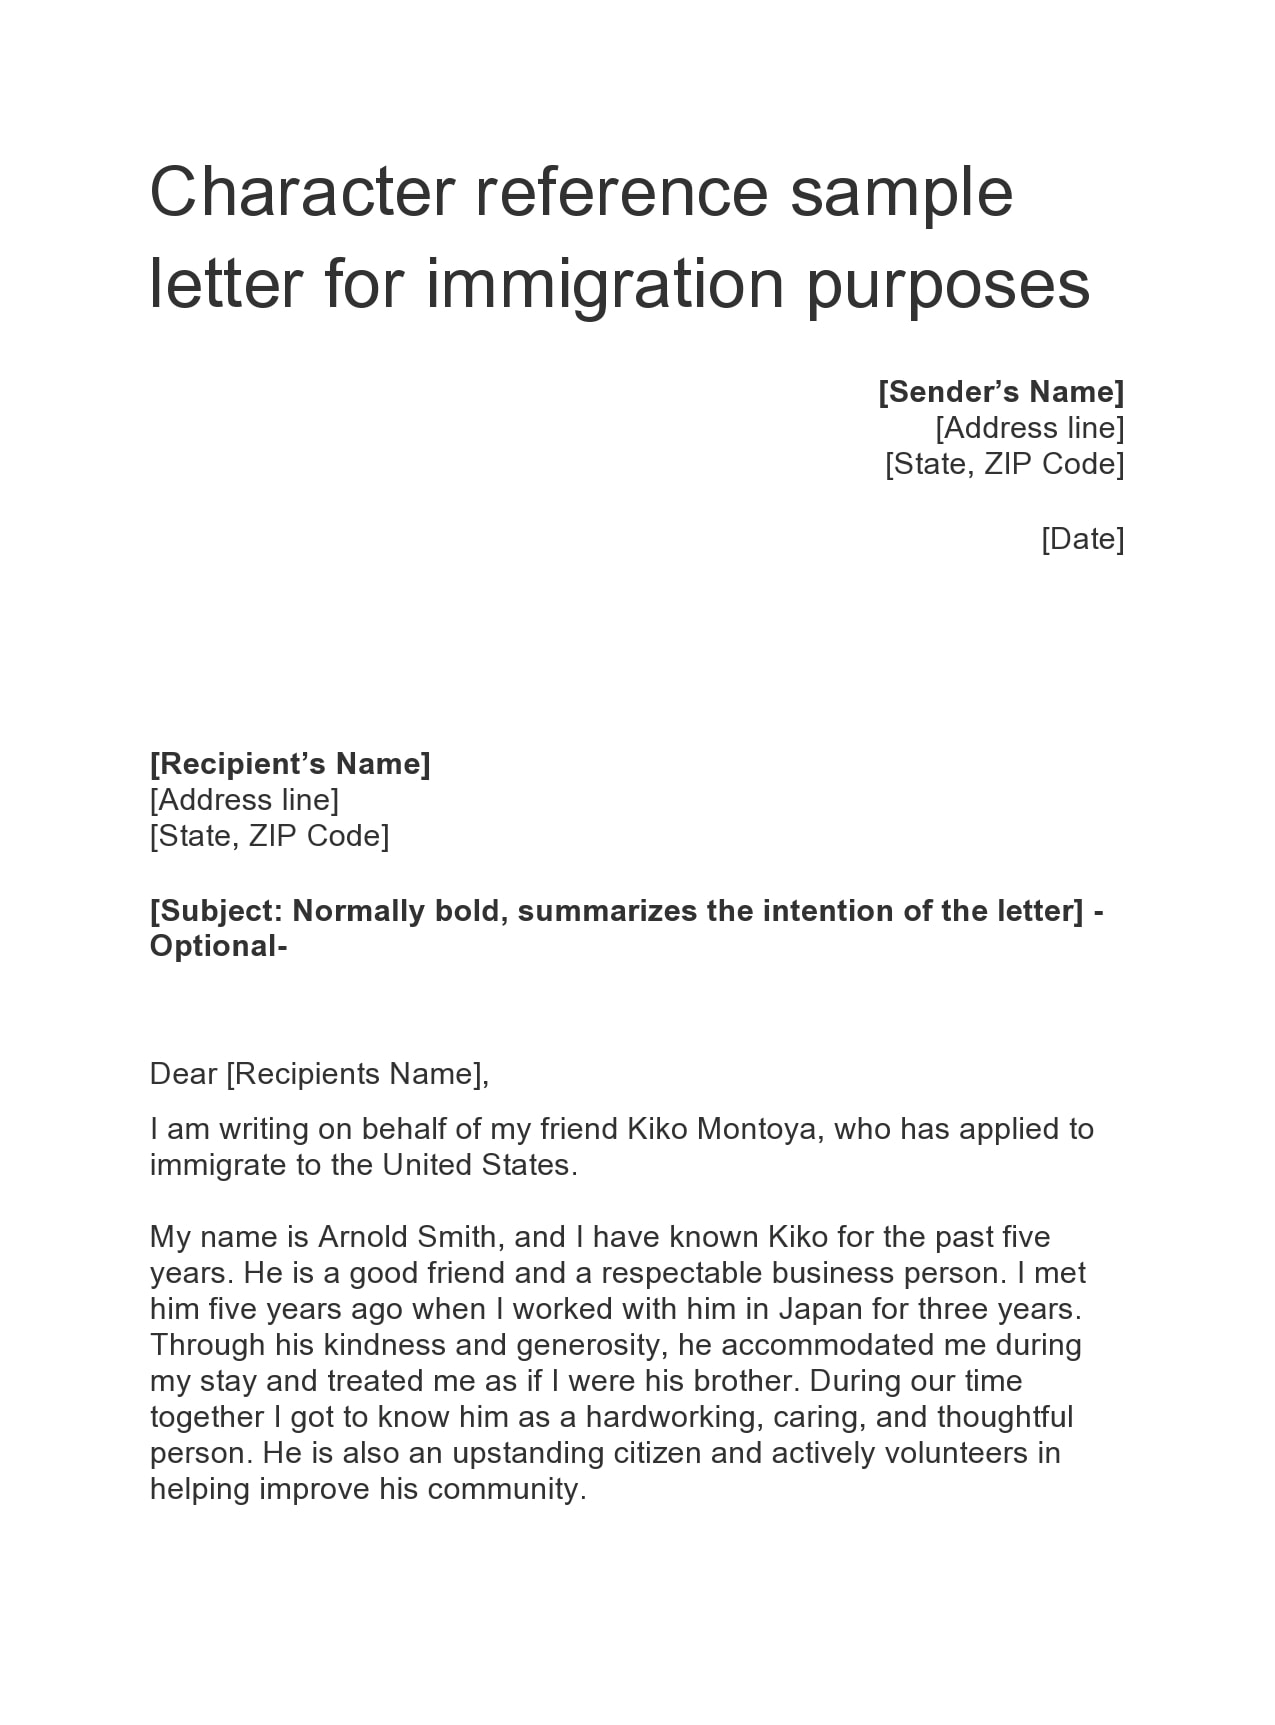 Letter Of Good Moral Character For Immigration Template from templatearchive.com